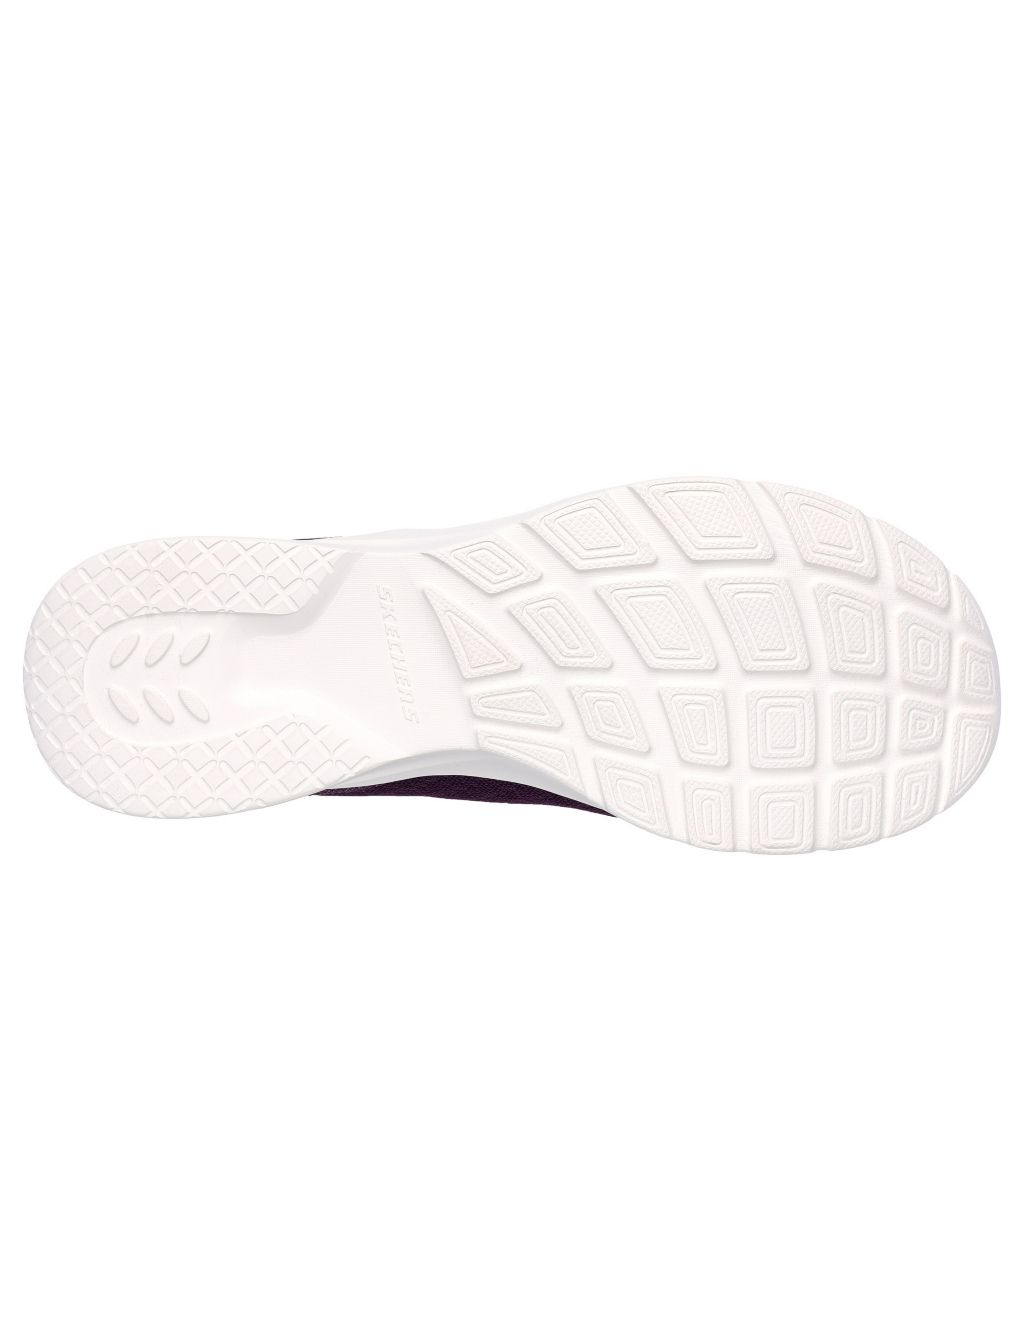 Dynamight 2.0 Real Smooth Slip On Trainers image 4